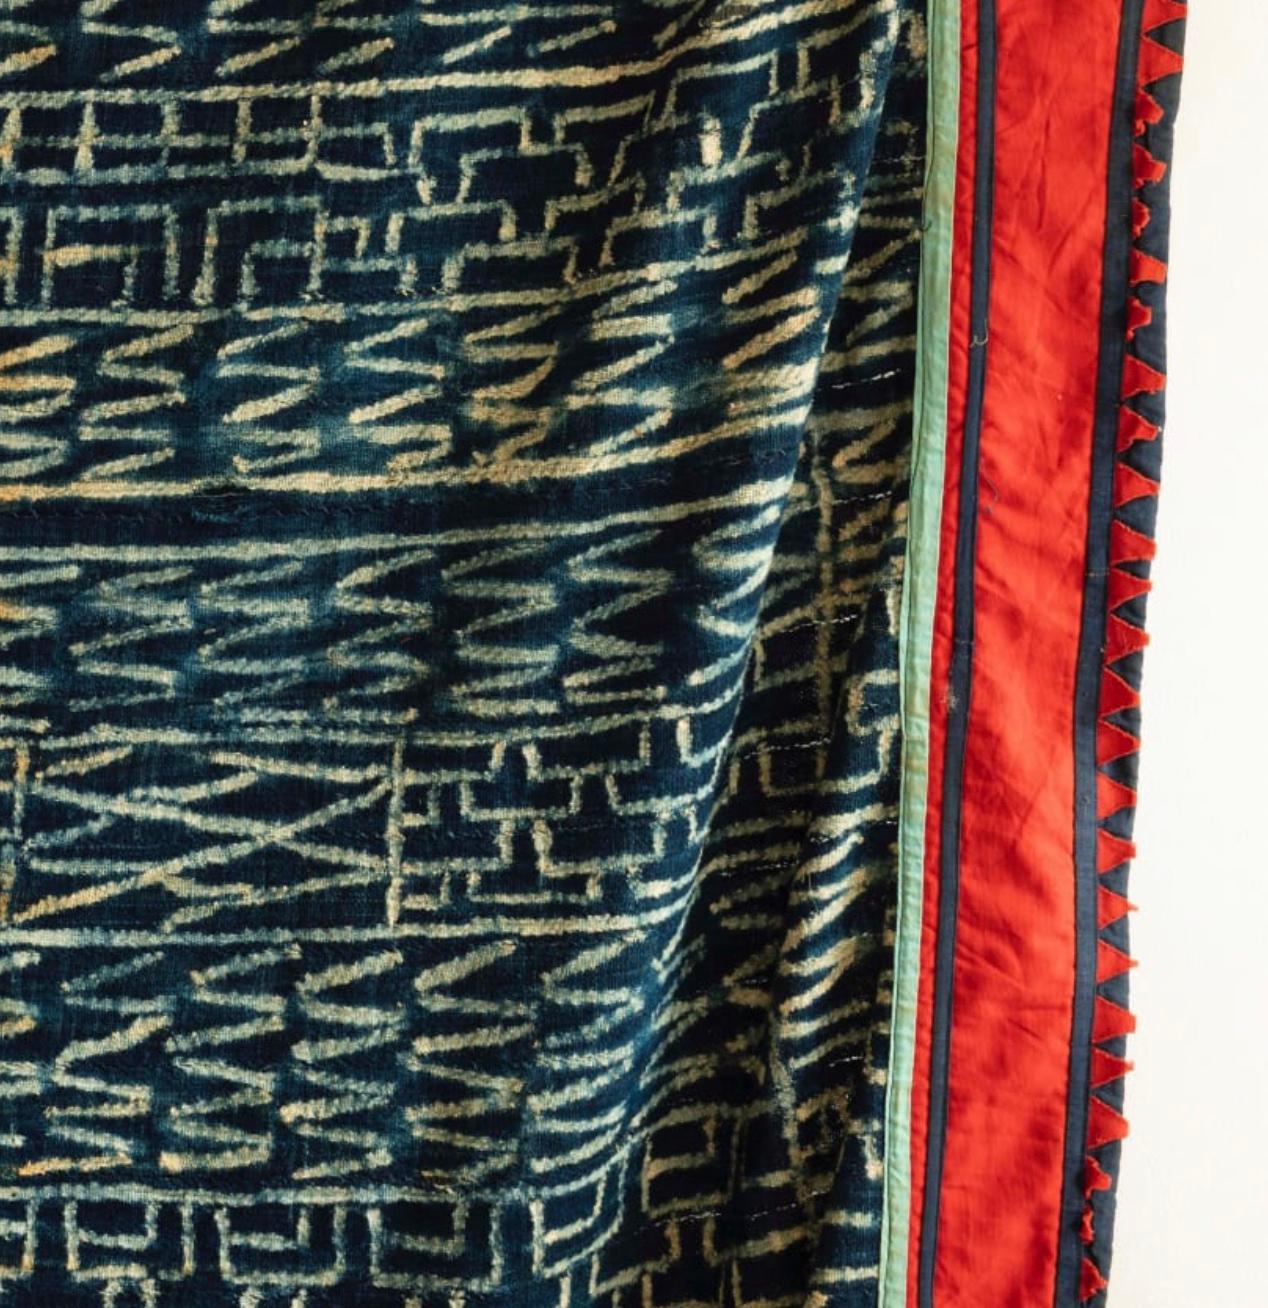 A very large scale N’dop display cloth panel made of strips of indigo dyed mixed fibre cloth tie dyed with typical designs. With the original red and green sawtooth border.

Bamileke, Cameroon c. 1950’s.